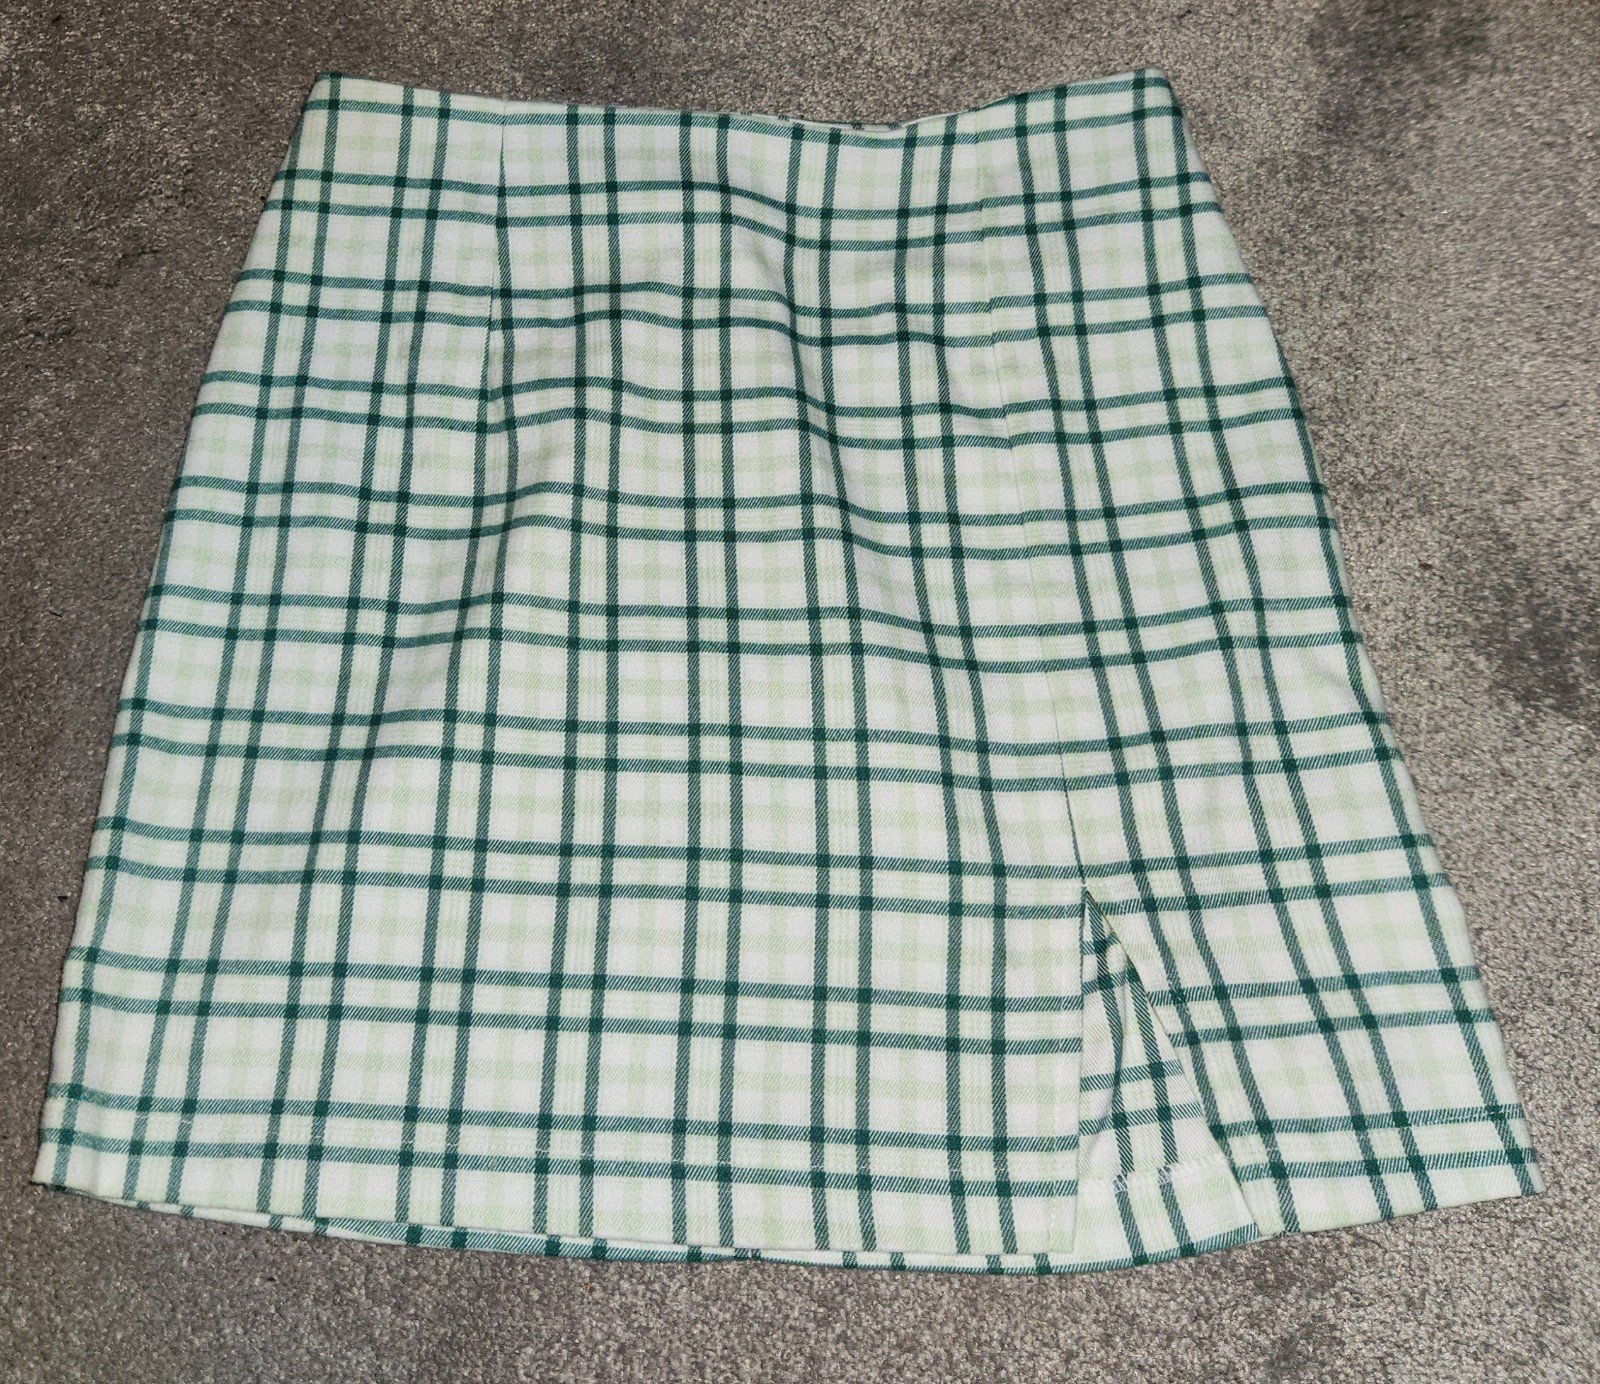 Exclusive Wild Fable Plaid Skirt Size 6 IB2VKYQHp Novel